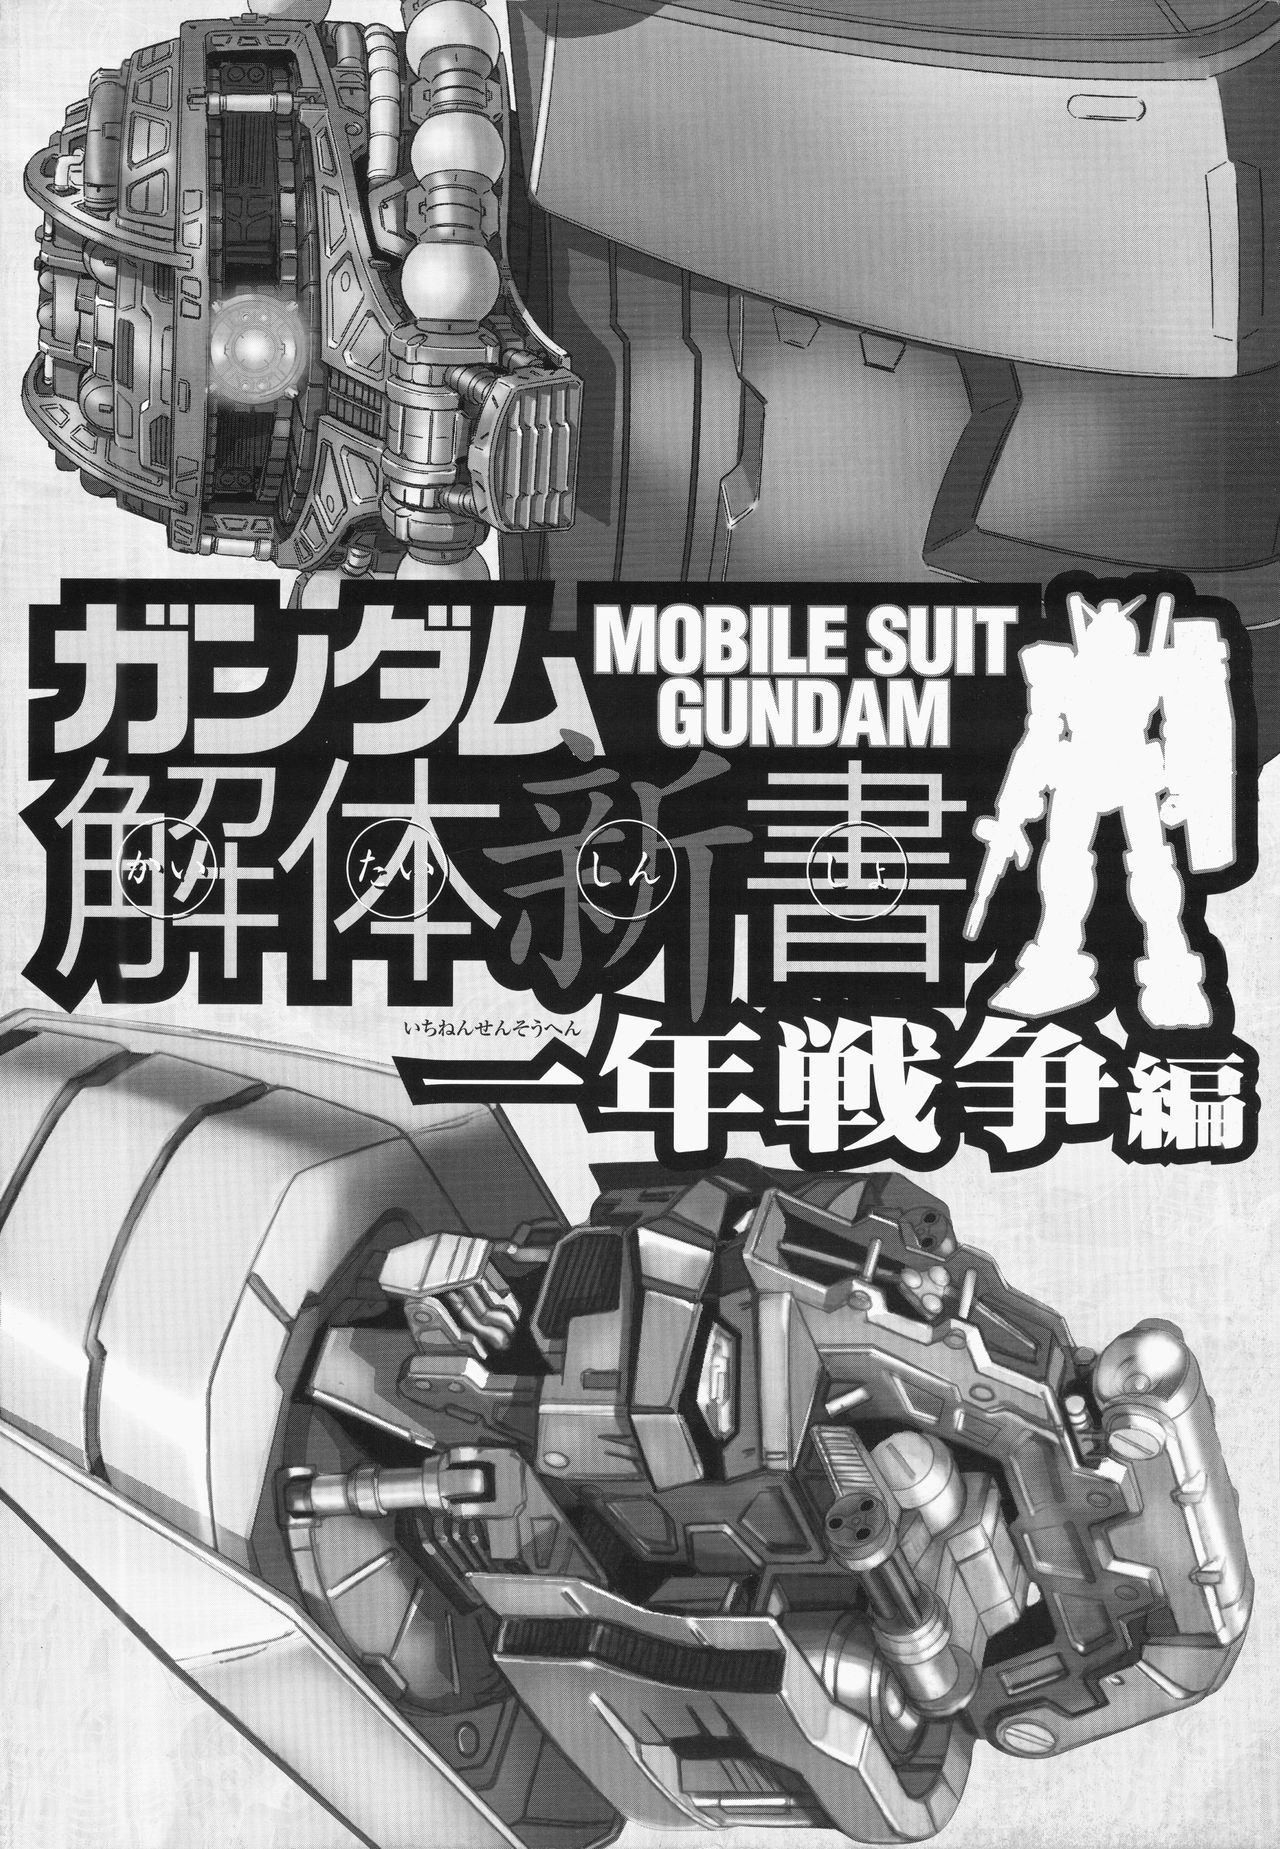 Mobile Suit Gundam - New Cross-Section Book - One Year War Edition 2